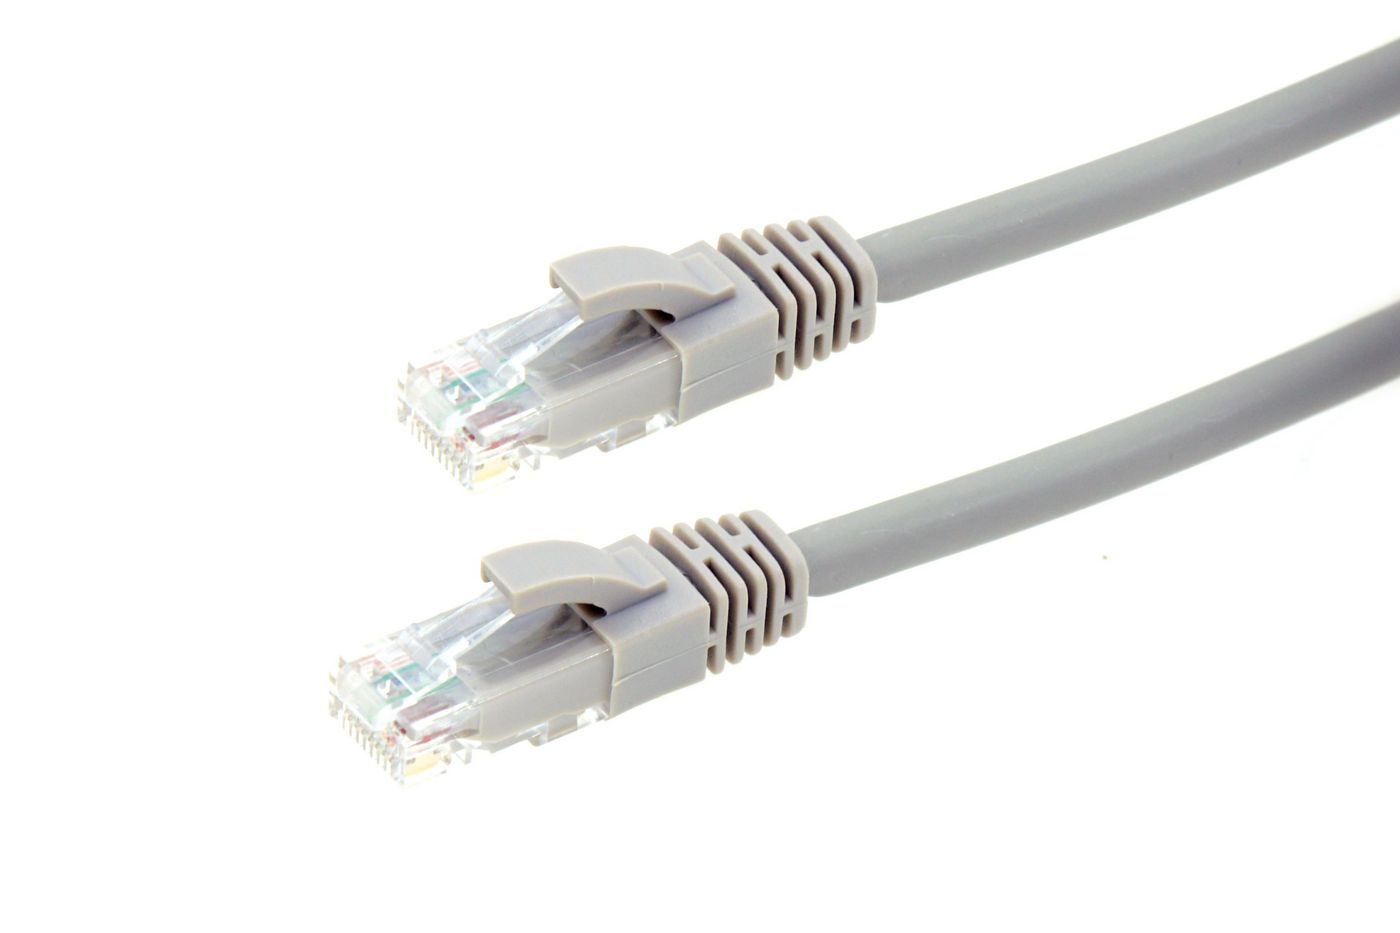 Patch Cable - CAT6 - Utp - Snagless - 15m - Grey